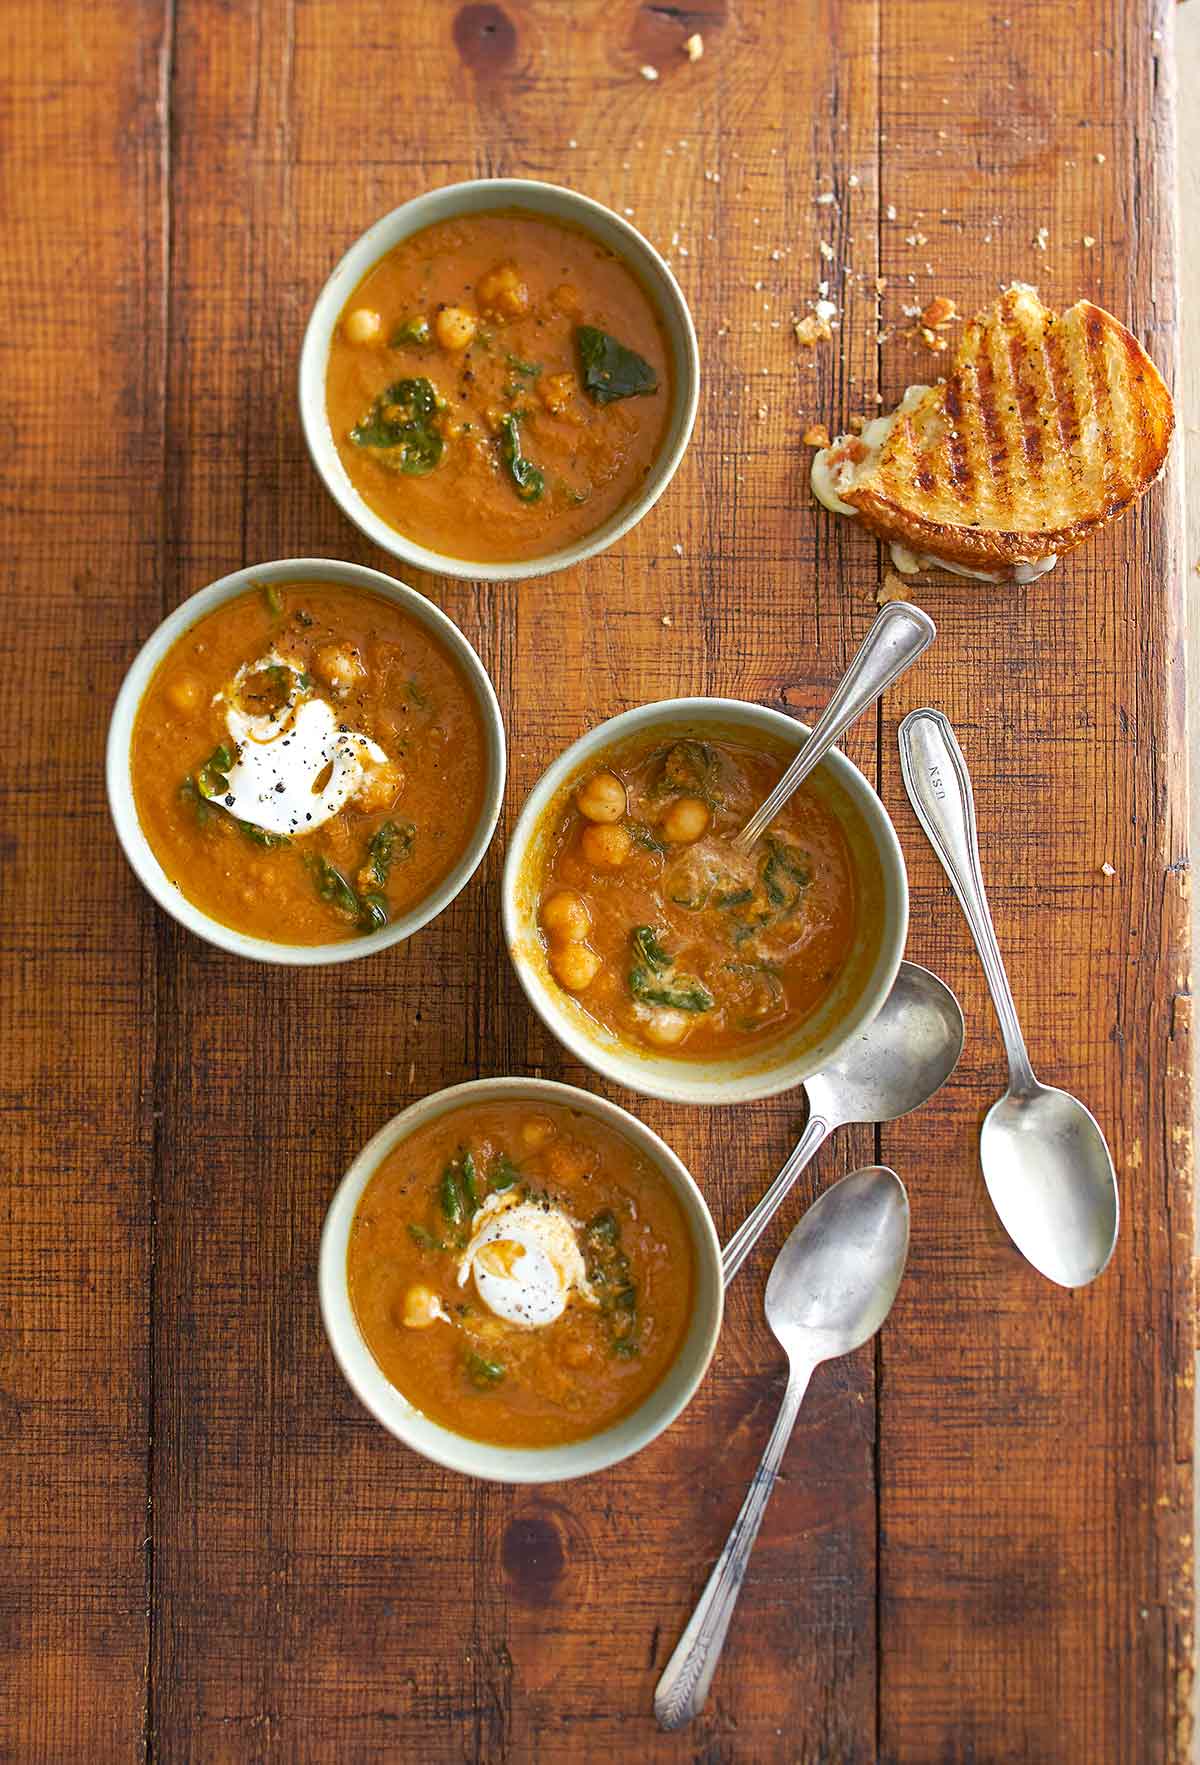 Each bowl is filled with tomato soup with chickpeas and spinach and topped with yogurt.